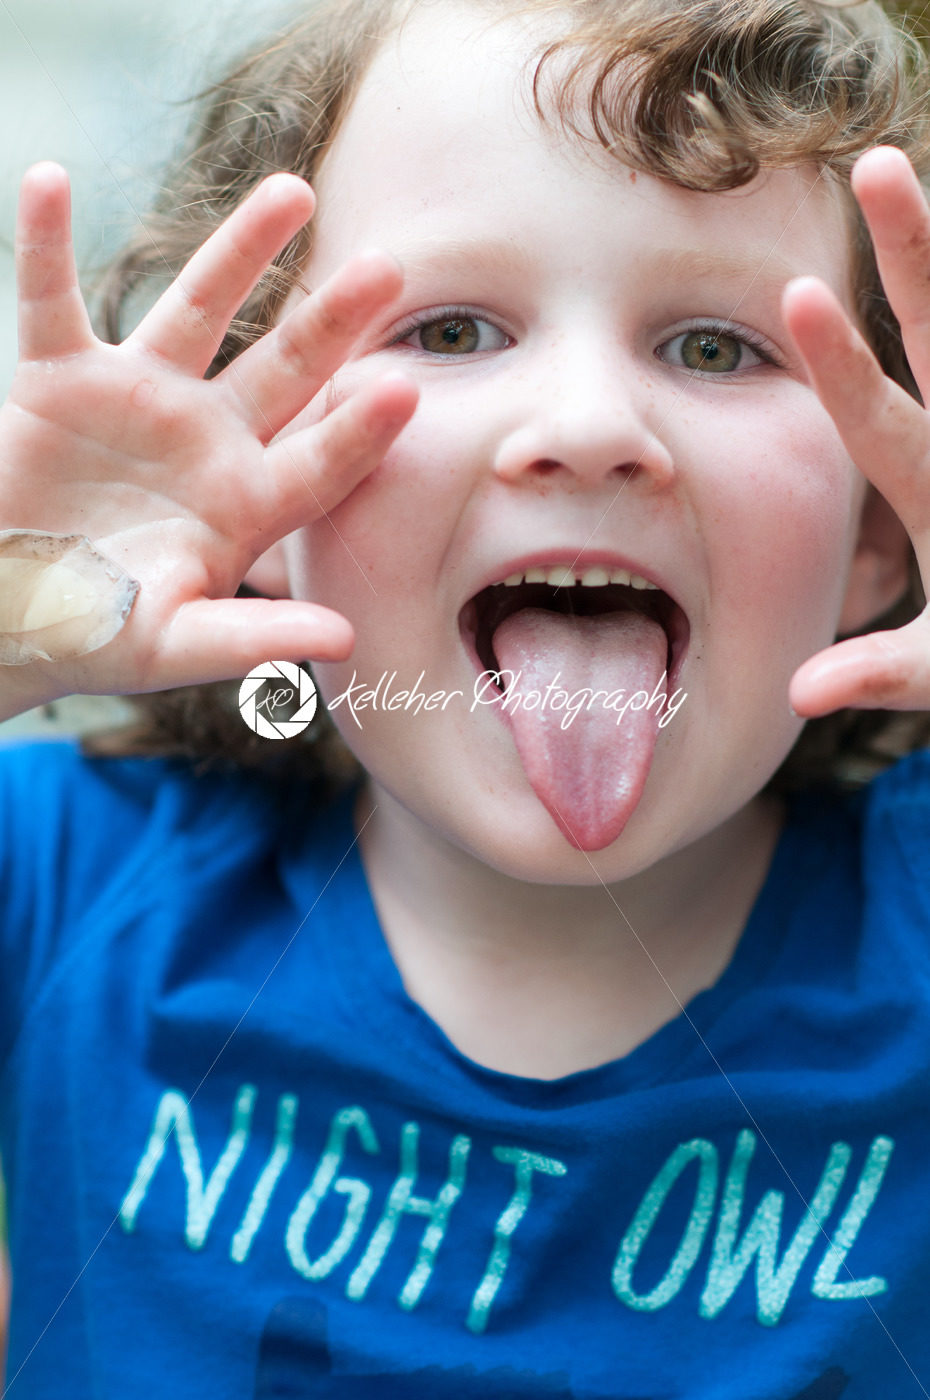 Young girl outside sticking out her tongue - Kelleher Photography Store